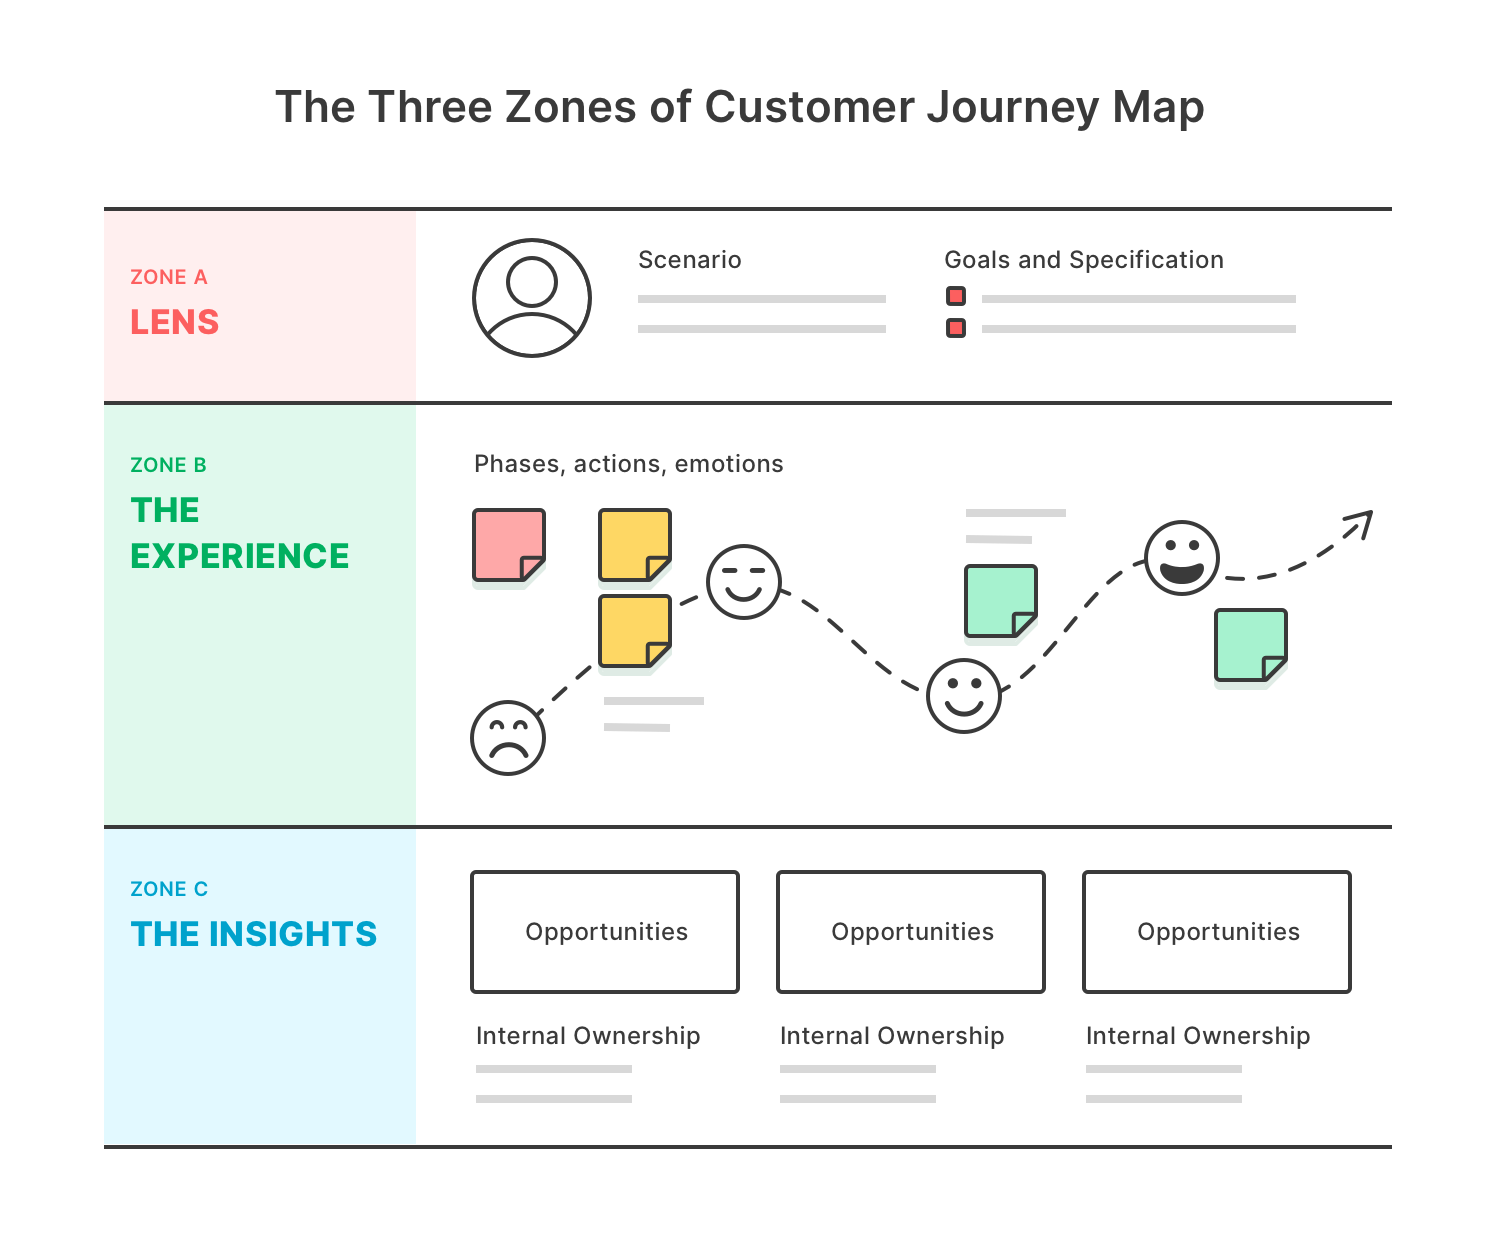 customer journey mapping example